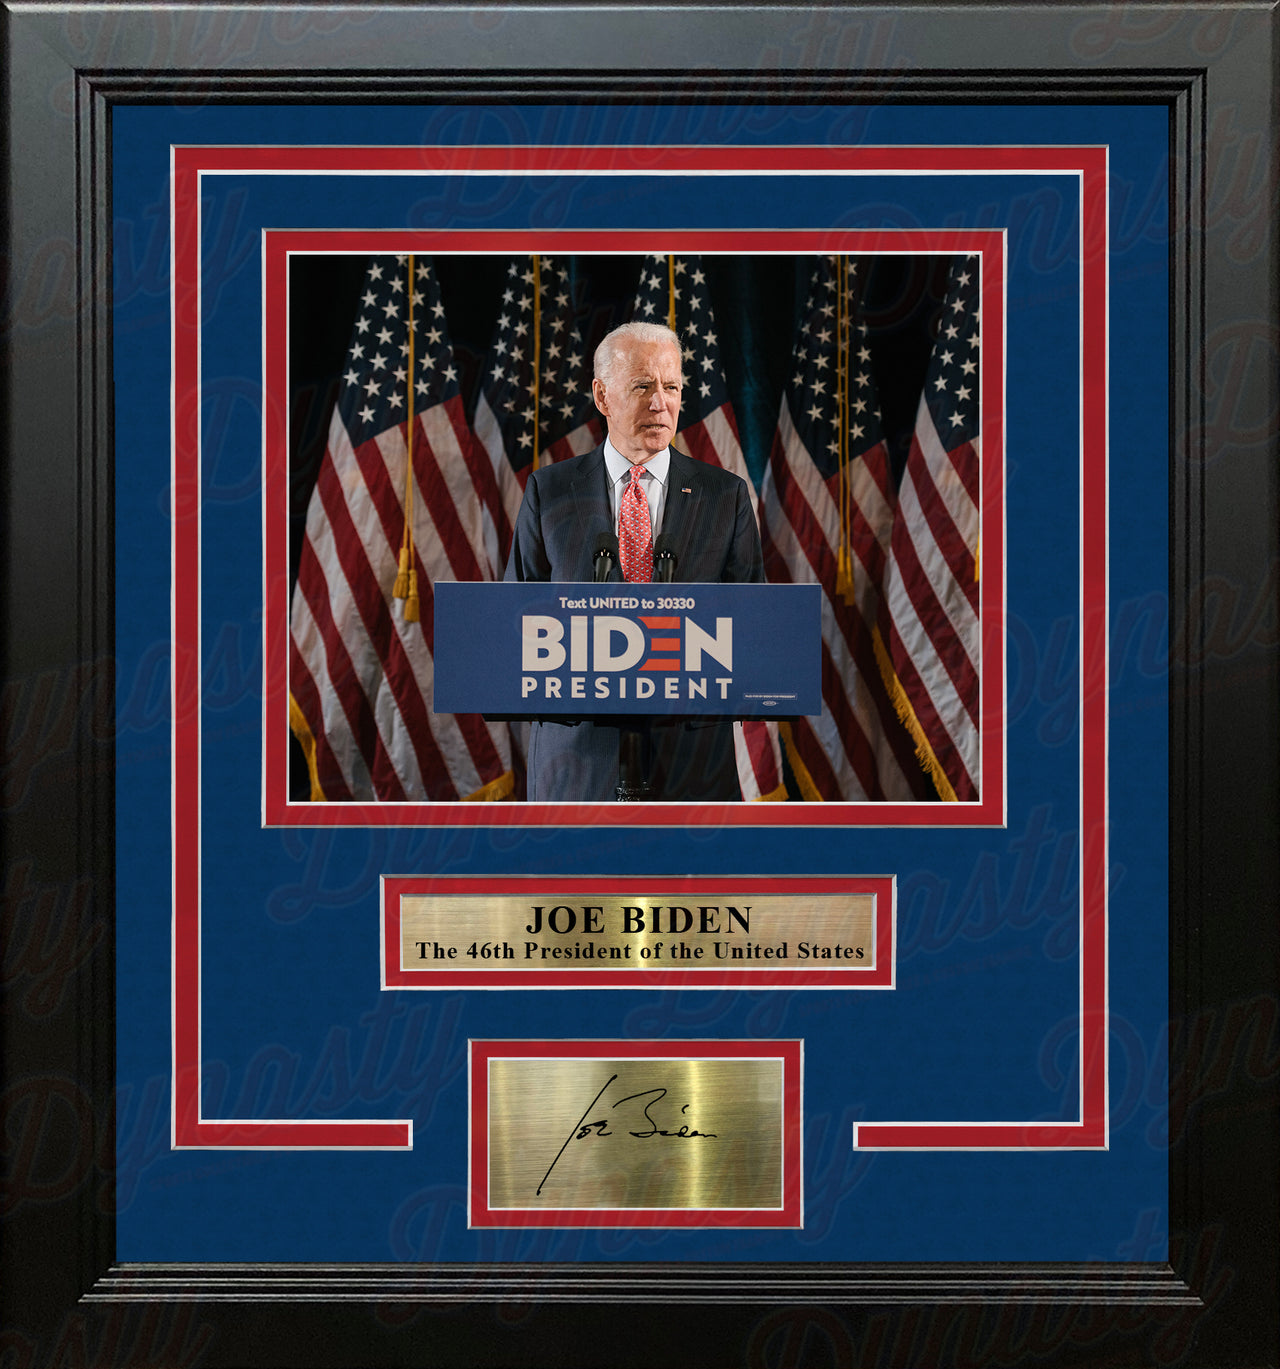 Joe Biden 46th President of the United States 8" x 10" Framed Photo with Engraved Autograph - Dynasty Sports & Framing 